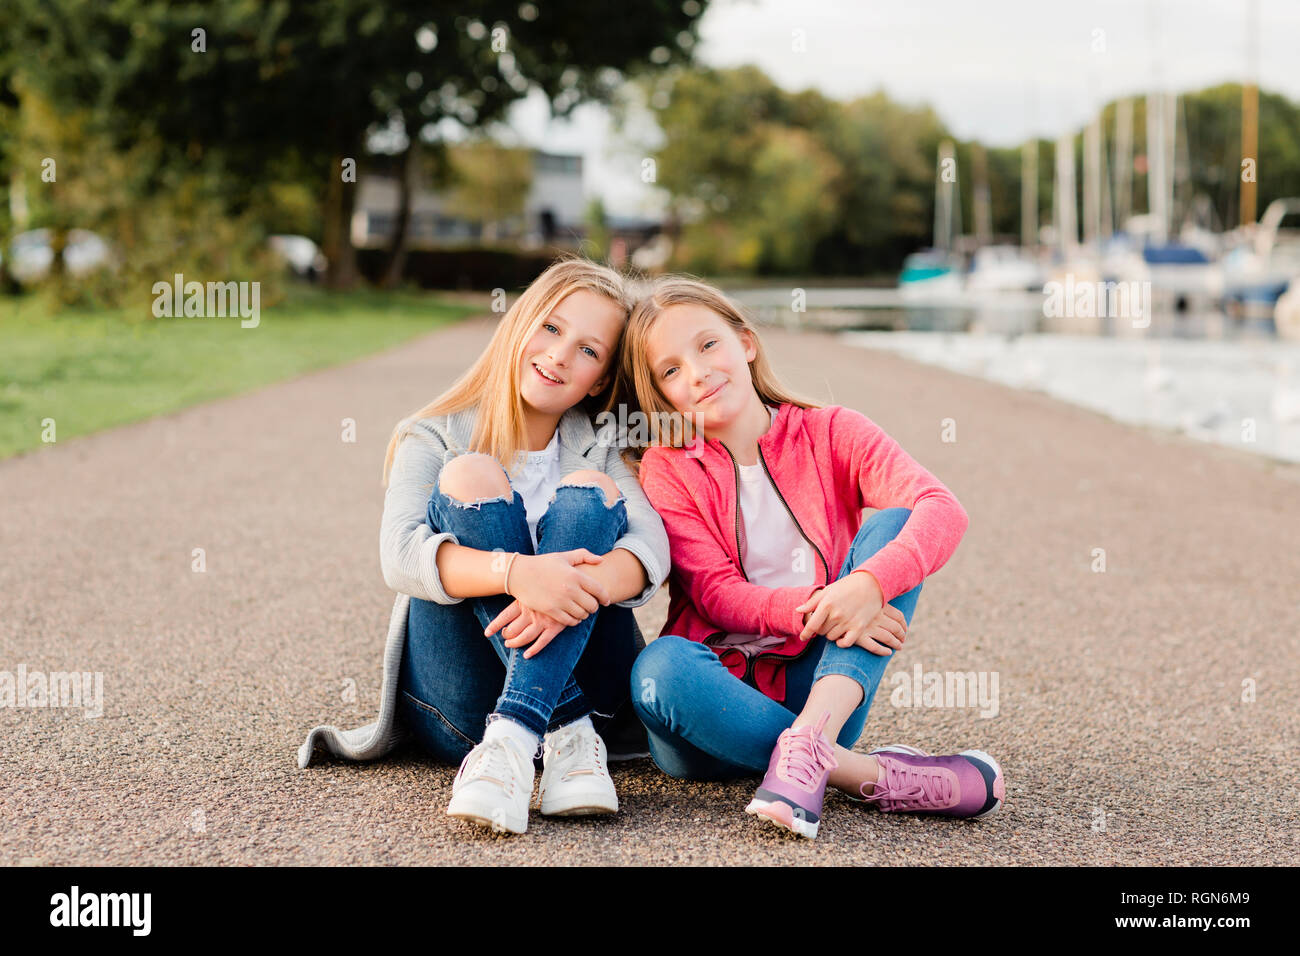 Portrait of two smiling girls sitting head to head on the ground Stock Photo